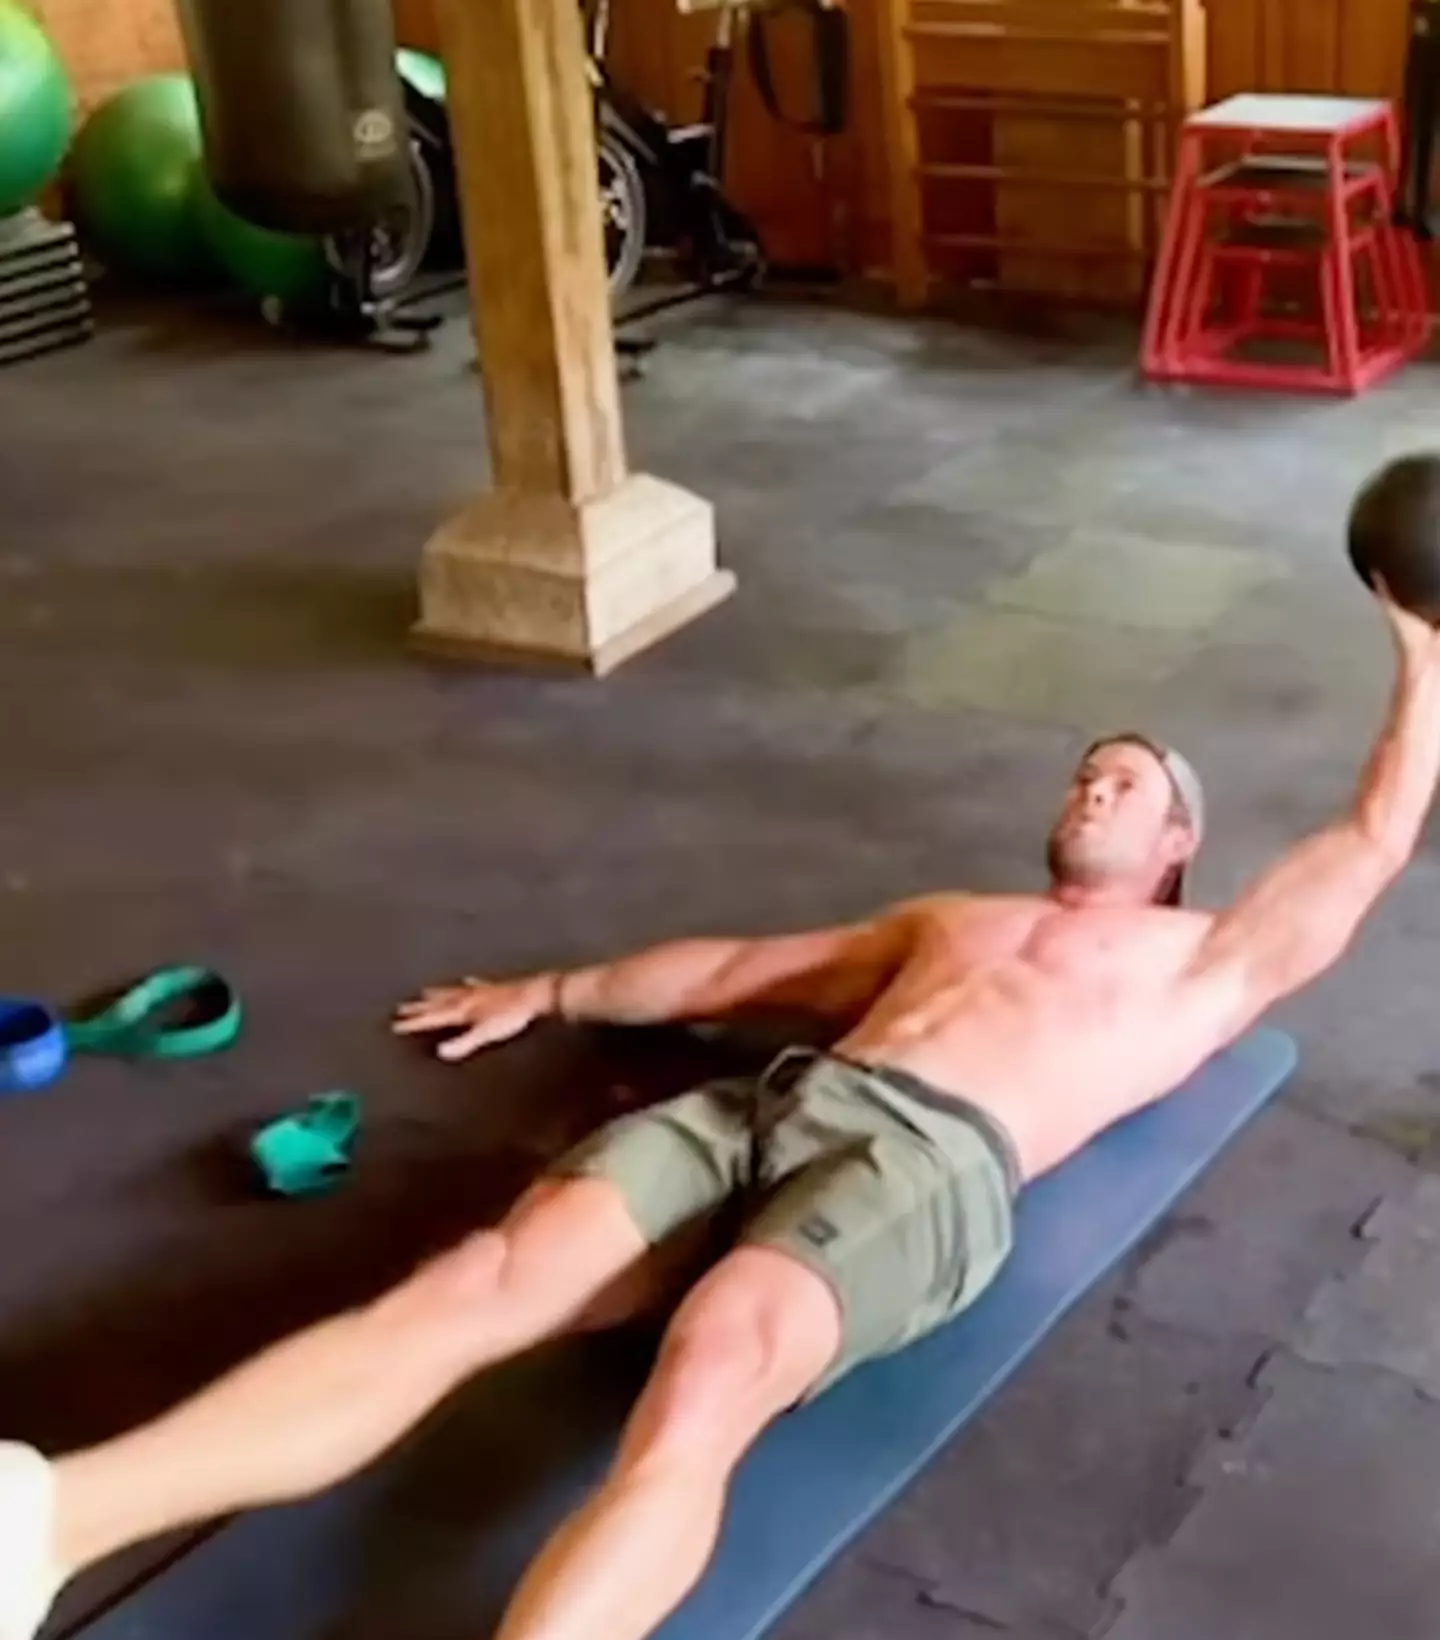 Chris Hemsworth has fans talking with his latest workout video.